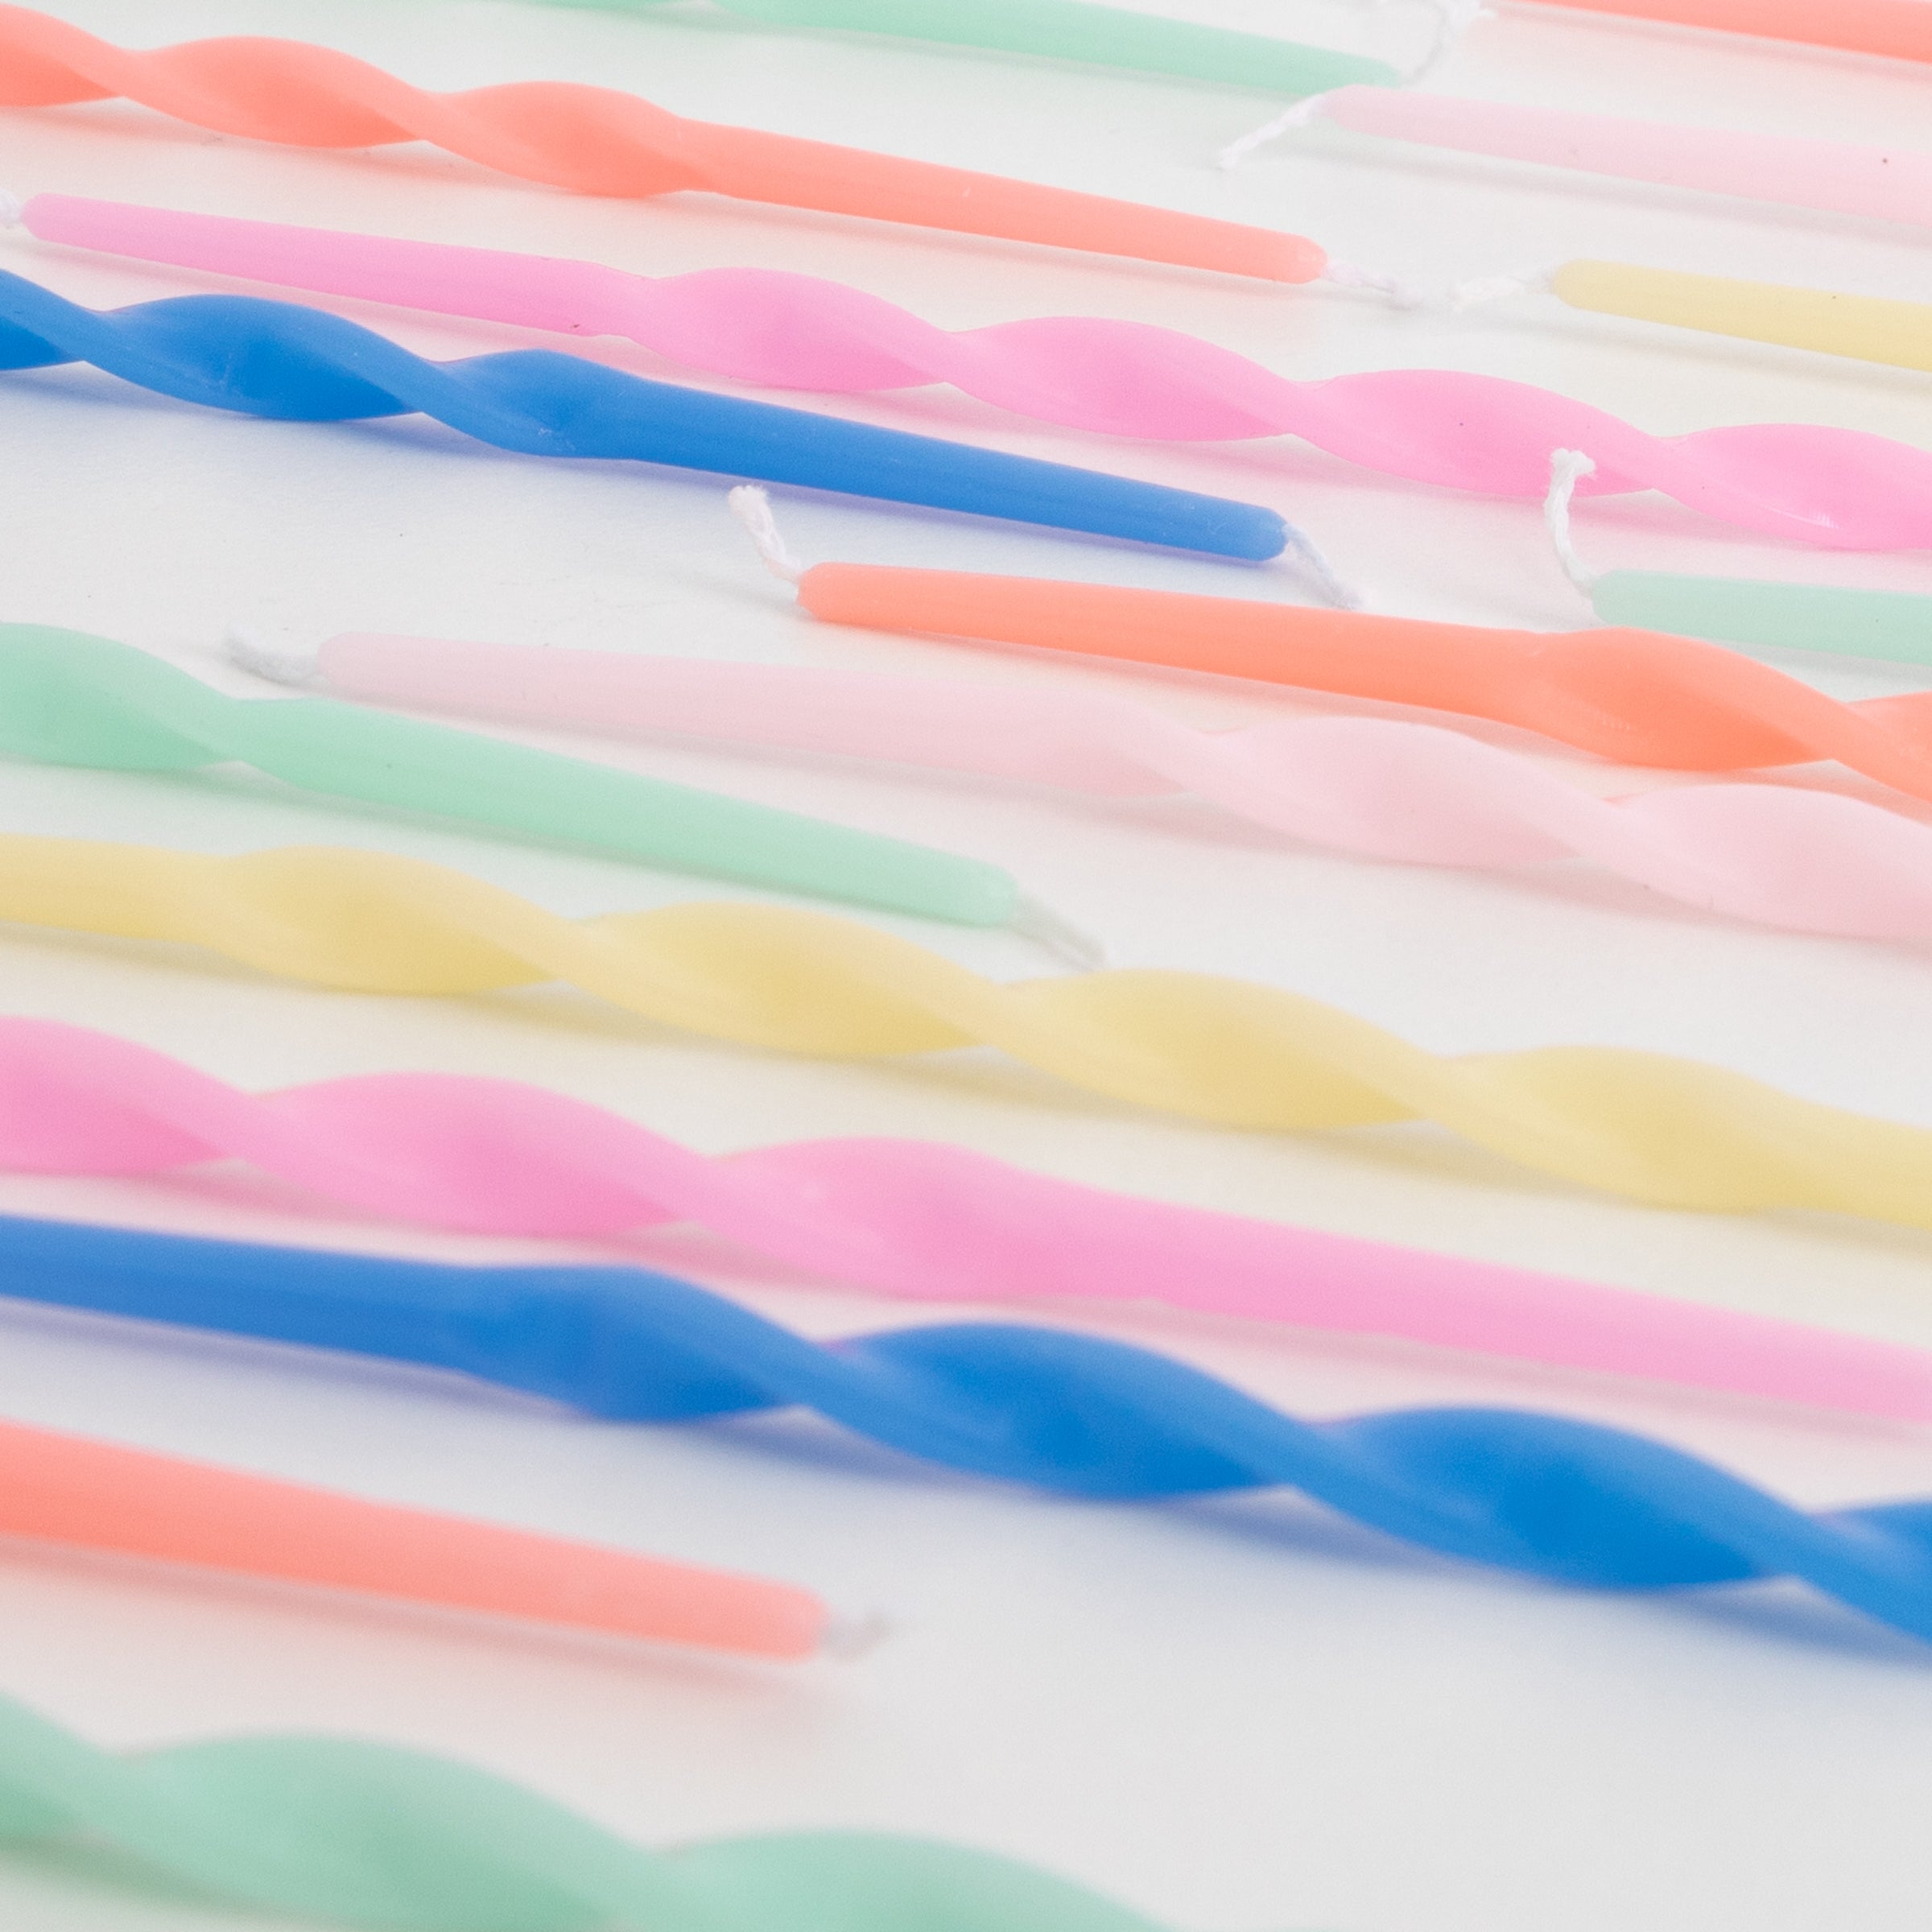 Our birthday candles, with a twisted shape, are ideal for a kids birthday party or any special celebration cake.